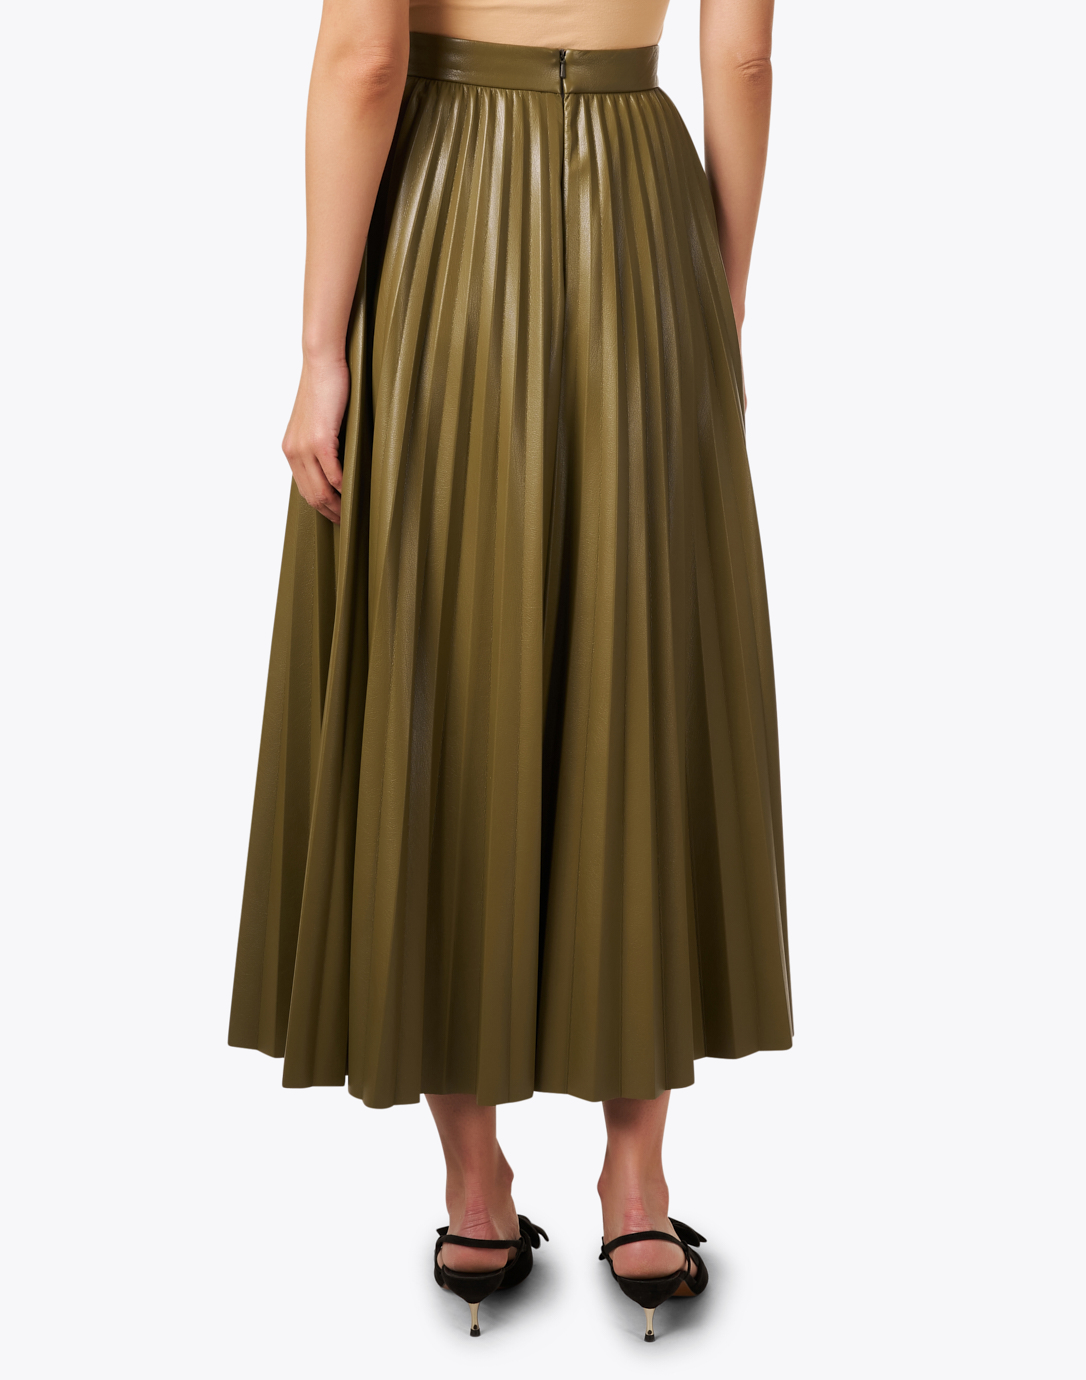 Newport Green Faux Leather Skirt